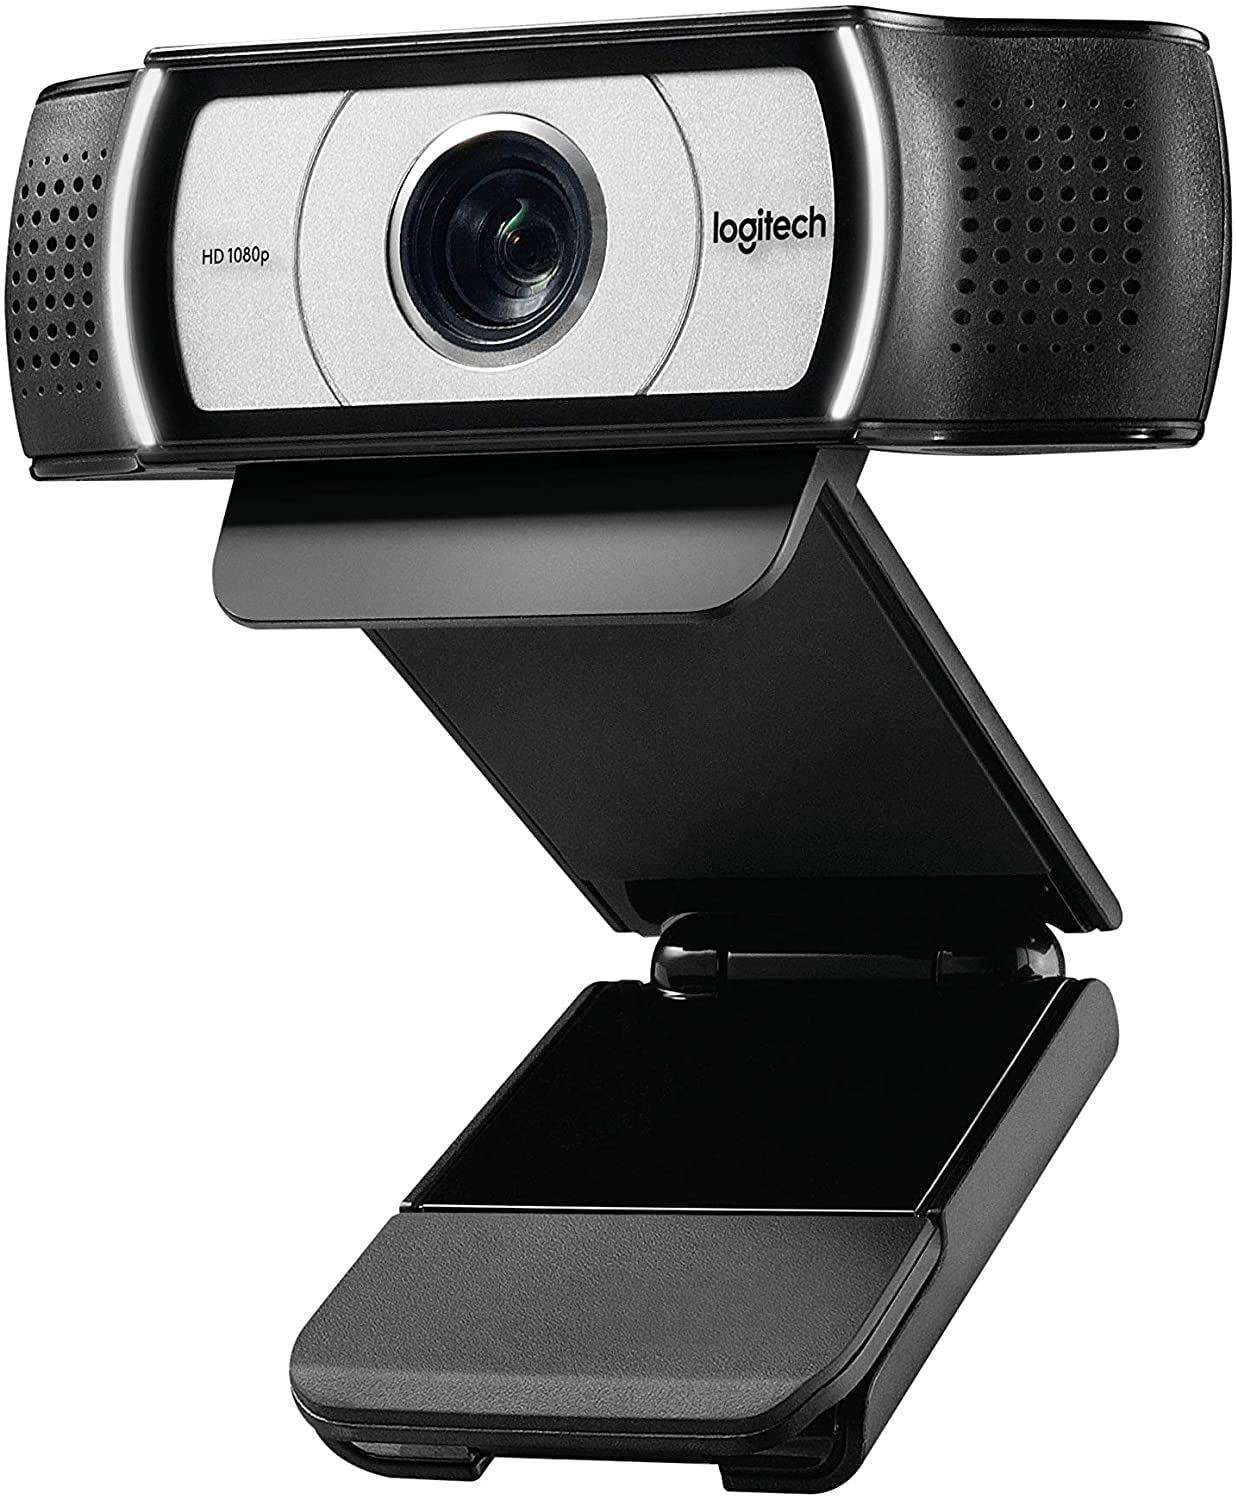 details about logitech hd 720p webcam for skype video calling w/ carl zeiss lens for pc & mac